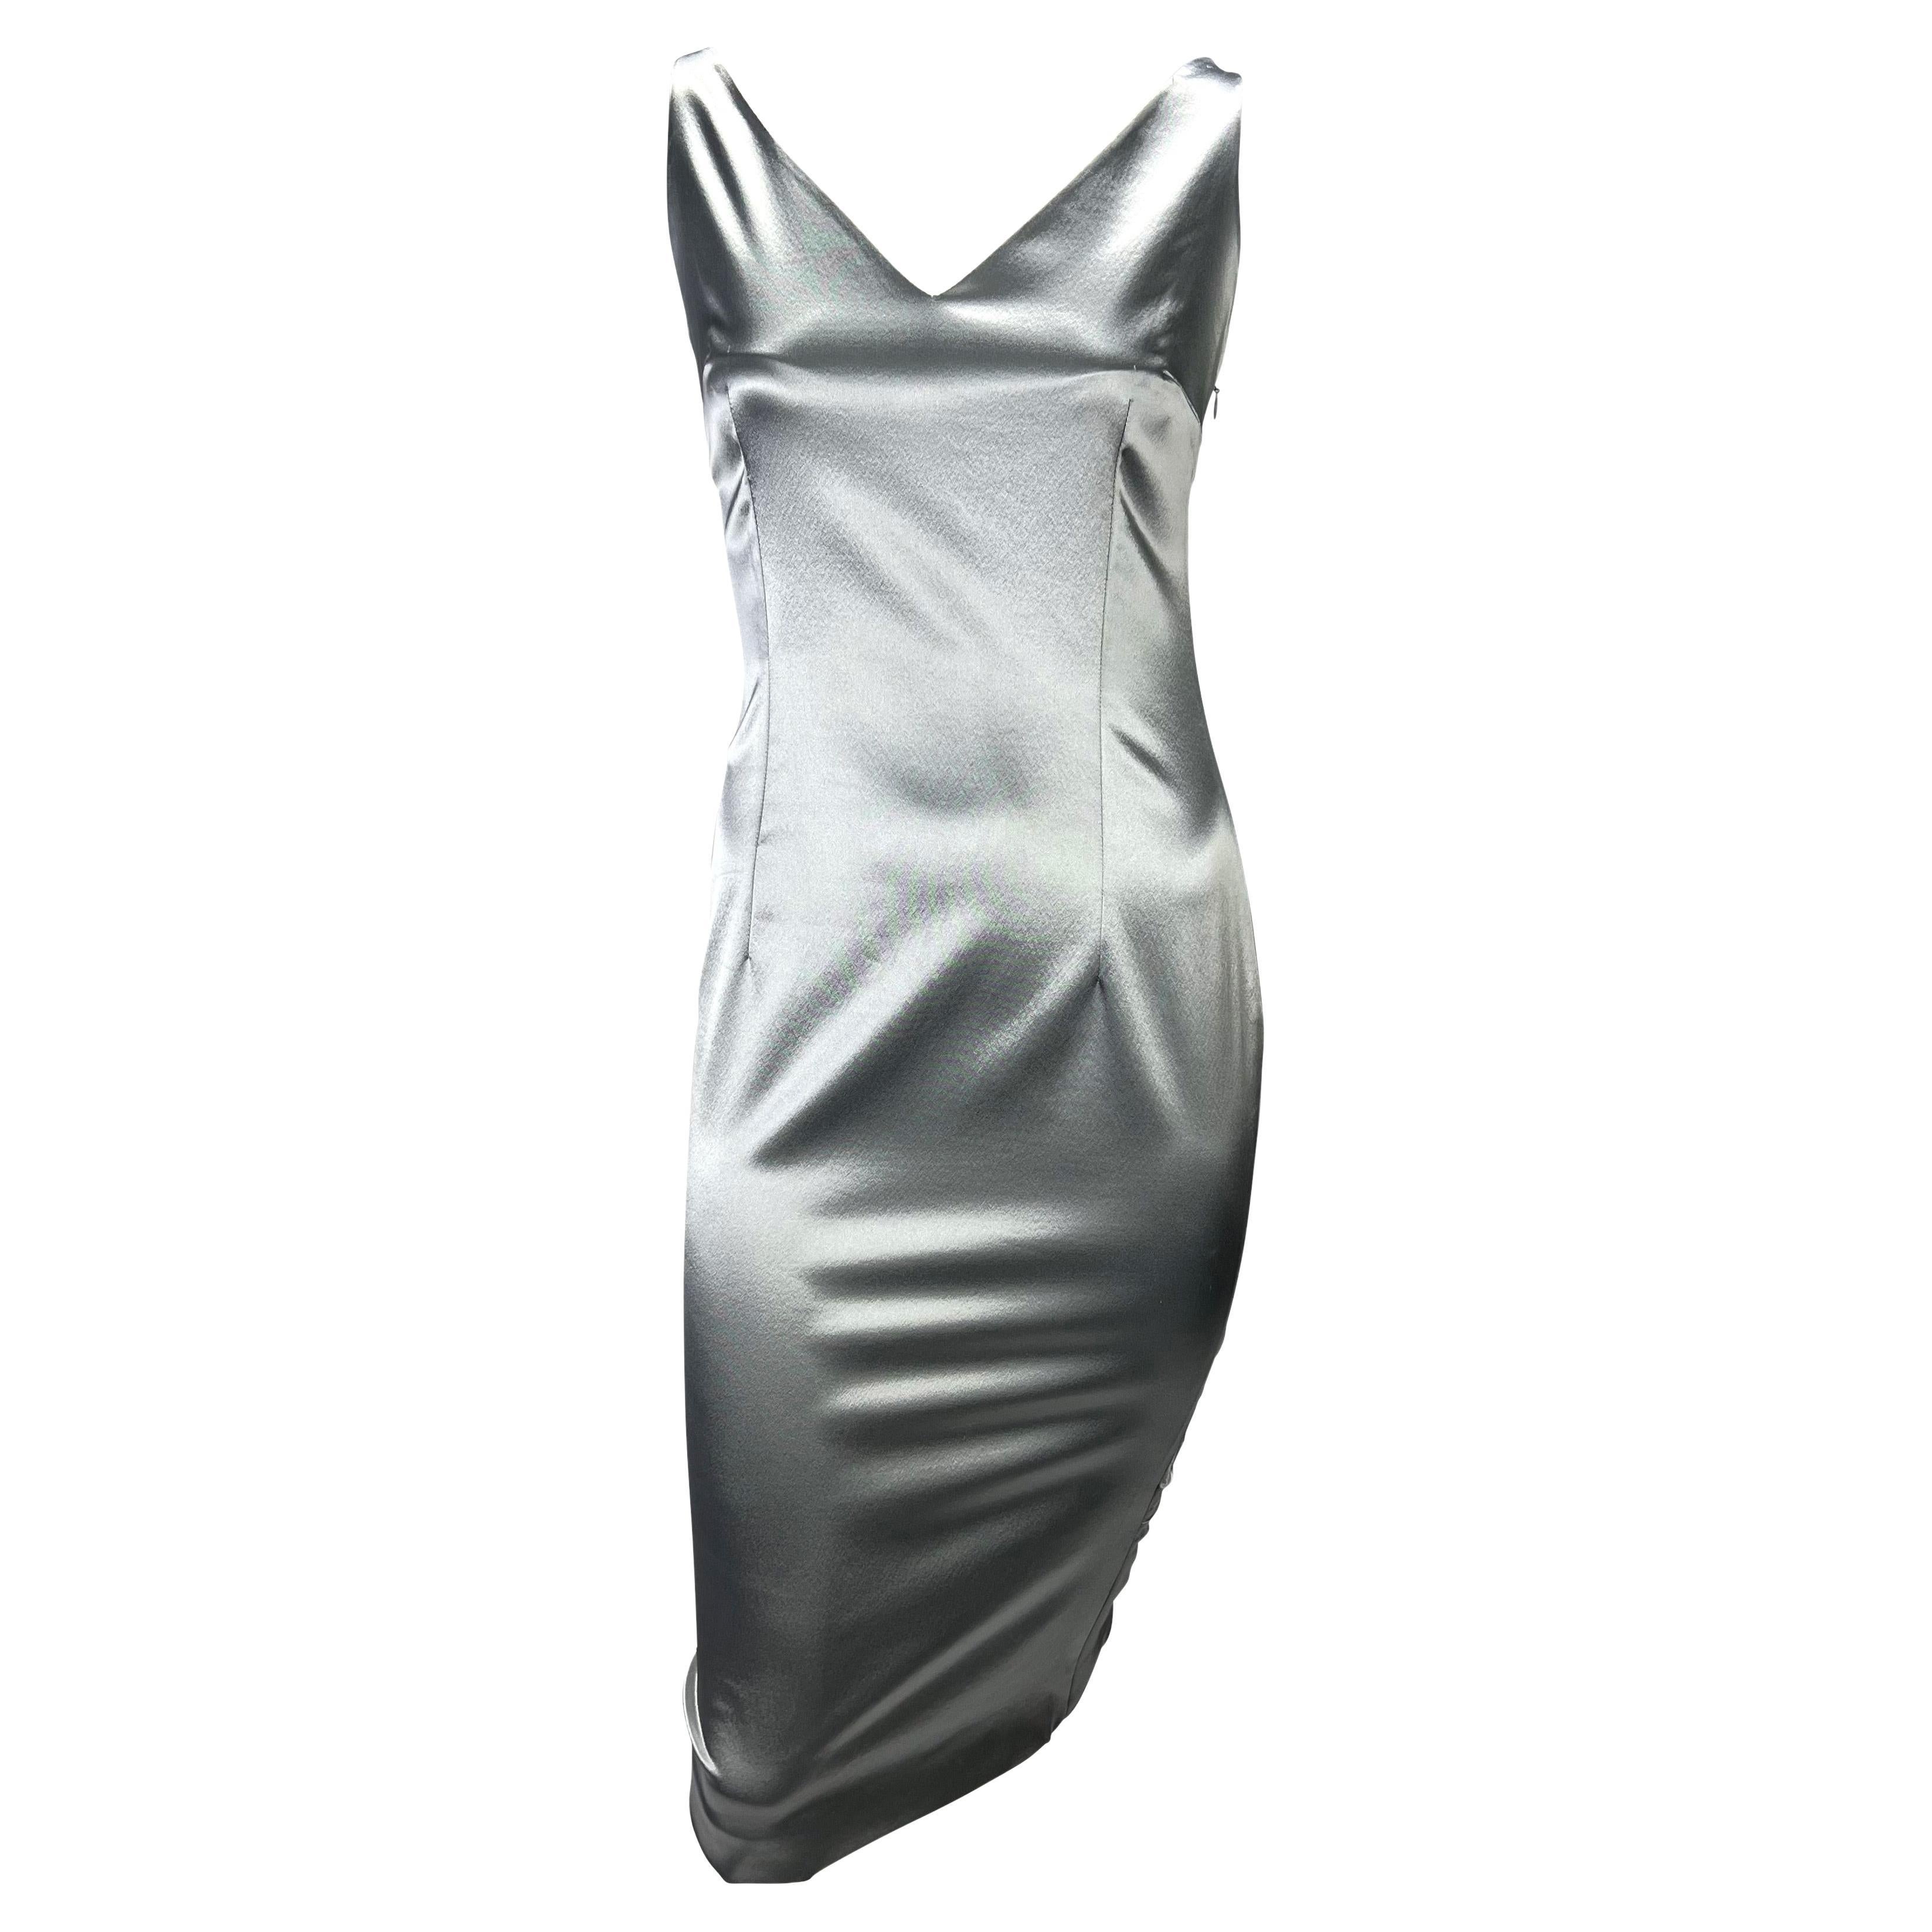 Presenting a beautiful silver satin Christian Dior Boutique dress, designed by John Galliano. From the Spring/Summer 2004 collection, this beautiful gunmetal-colored dress features a v-neckline, v-cutout at the back, and a gathered detail at the